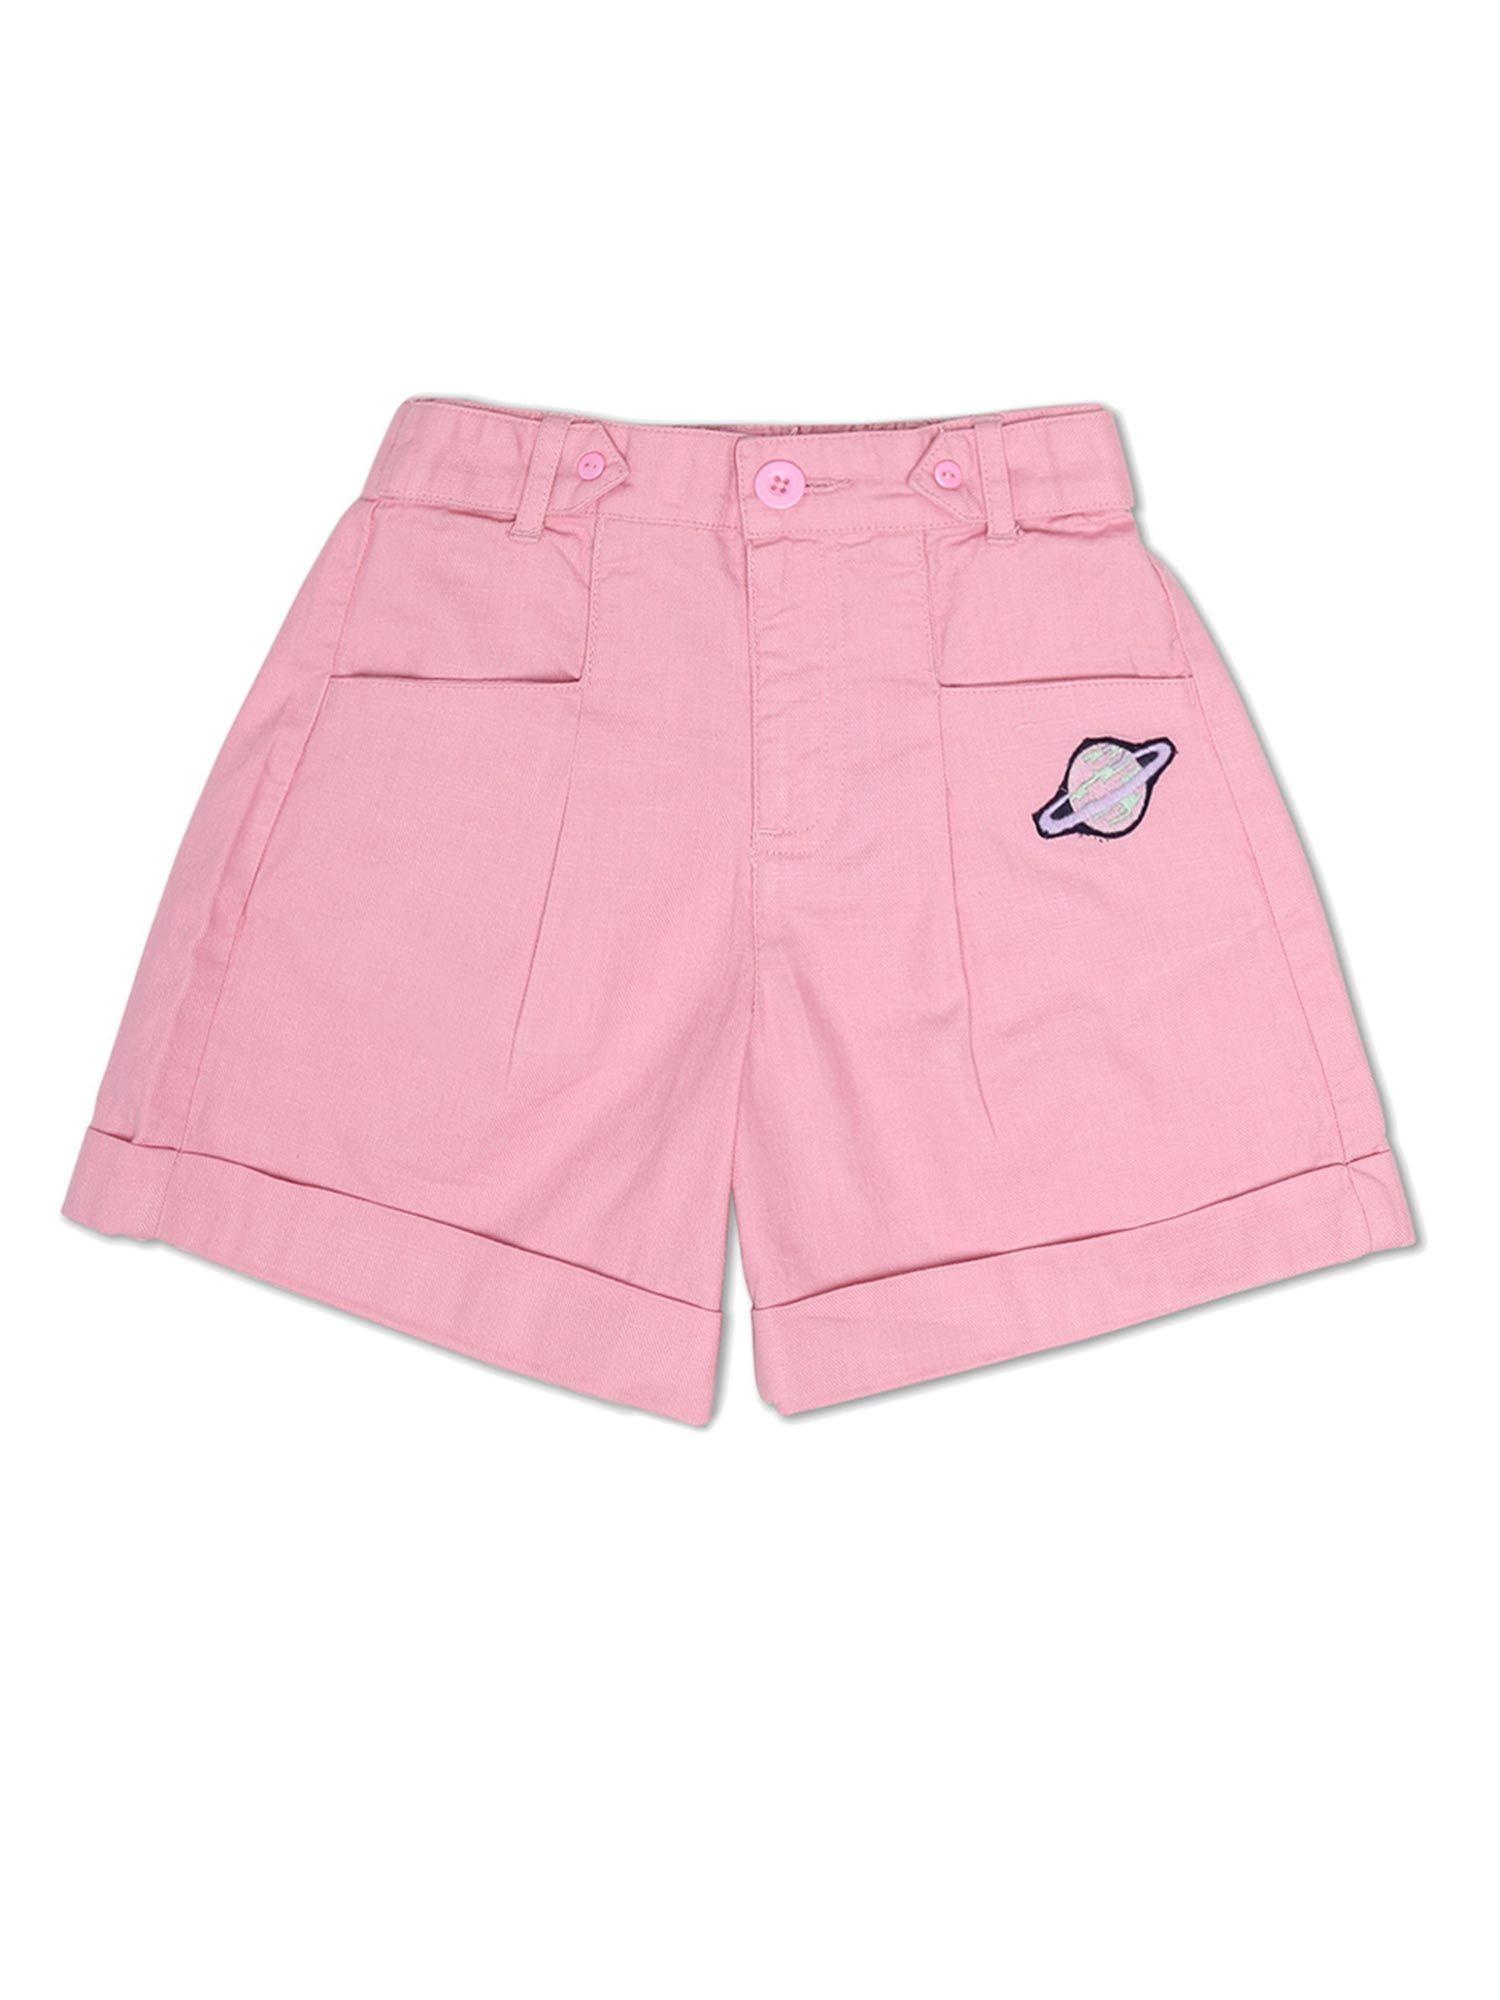 girls-pink-solid-shorts